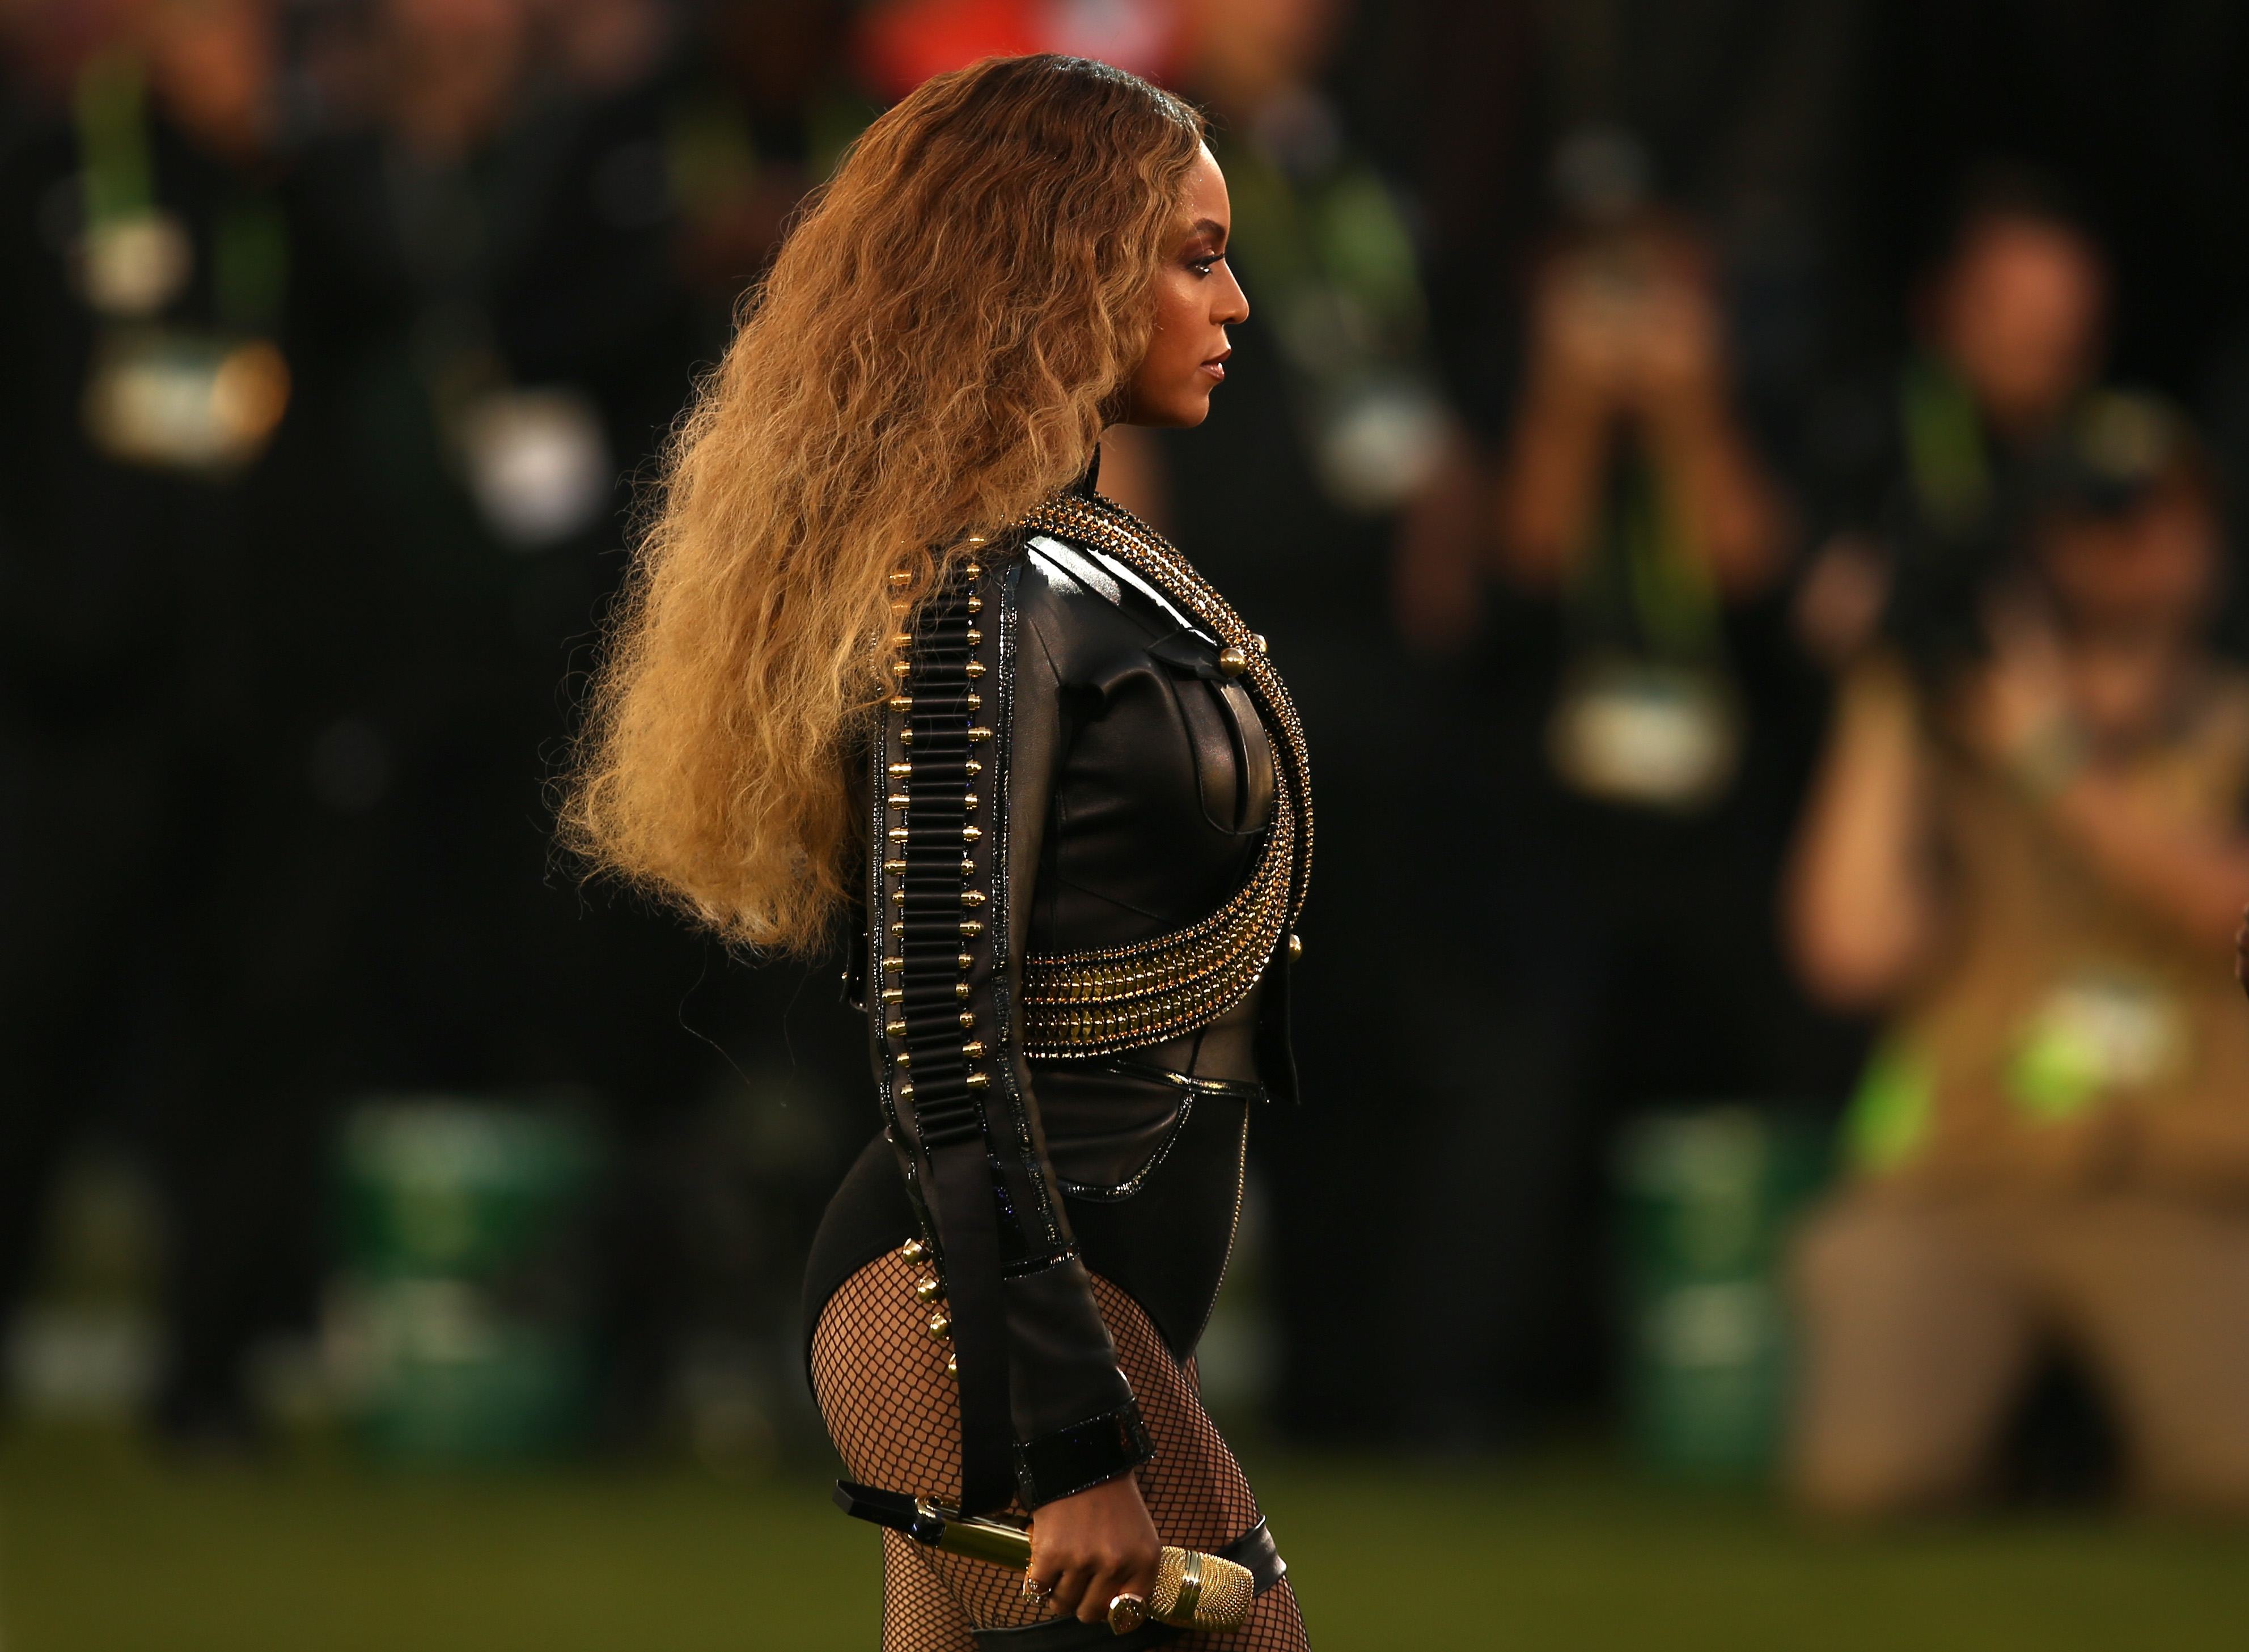 Beyonce performs onstage during the Pepsi Super Bowl 50 Halftime Show at Levi's Stadium in Santa Clara, Calif., on Feb. 7, 2016.